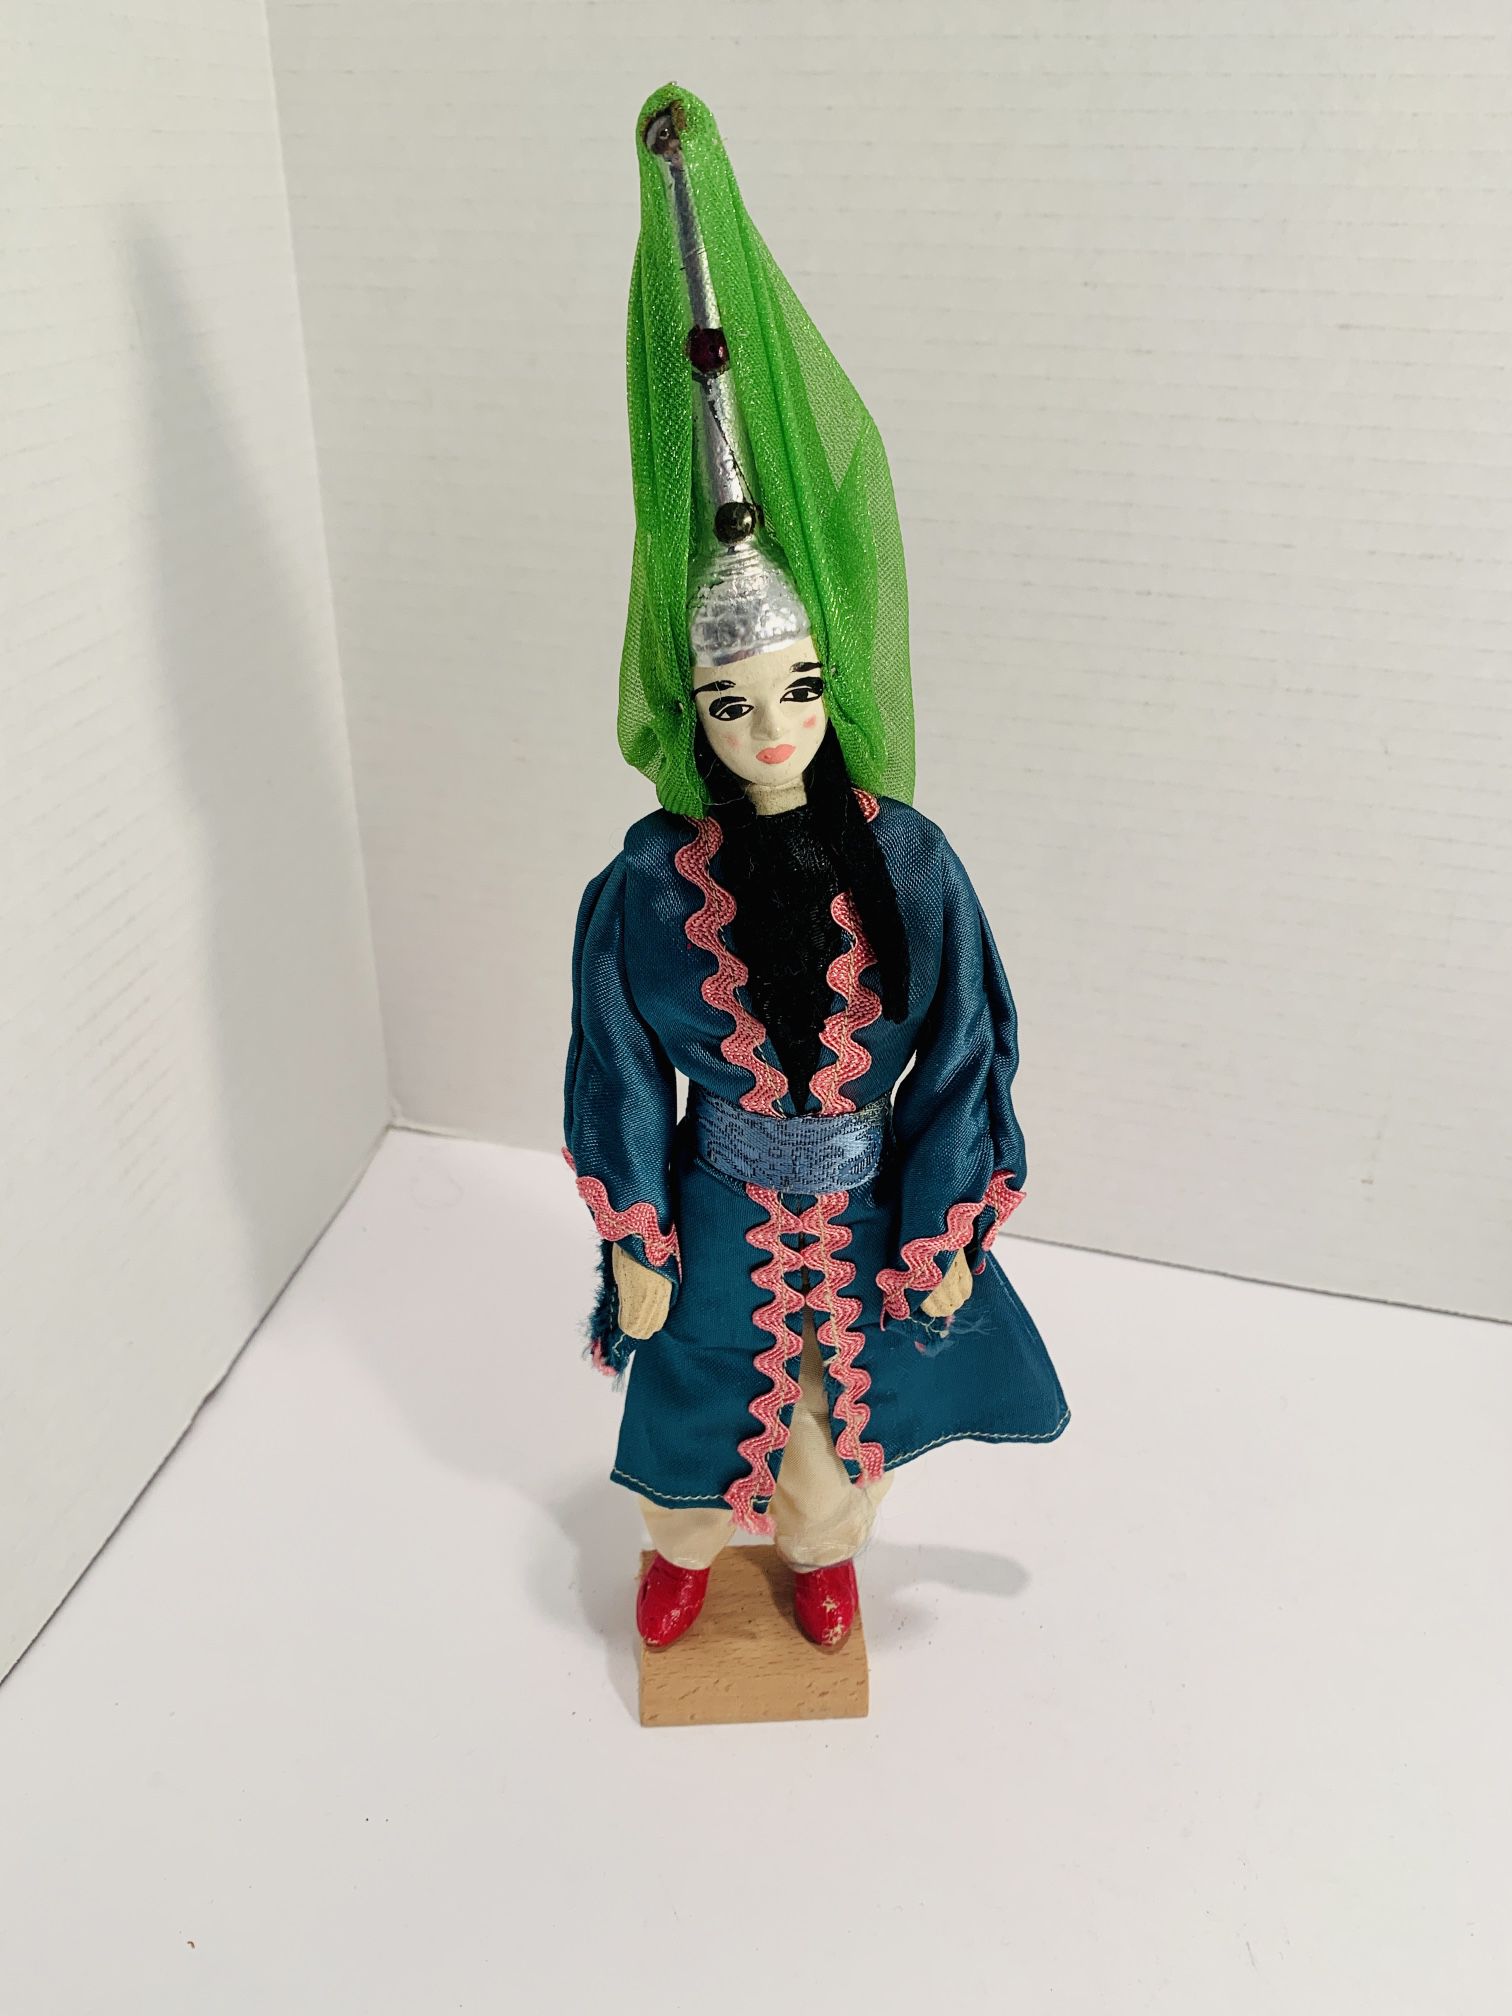 Vintage Collectible Asian Doll From Damascus on stand - 11.5” Tall